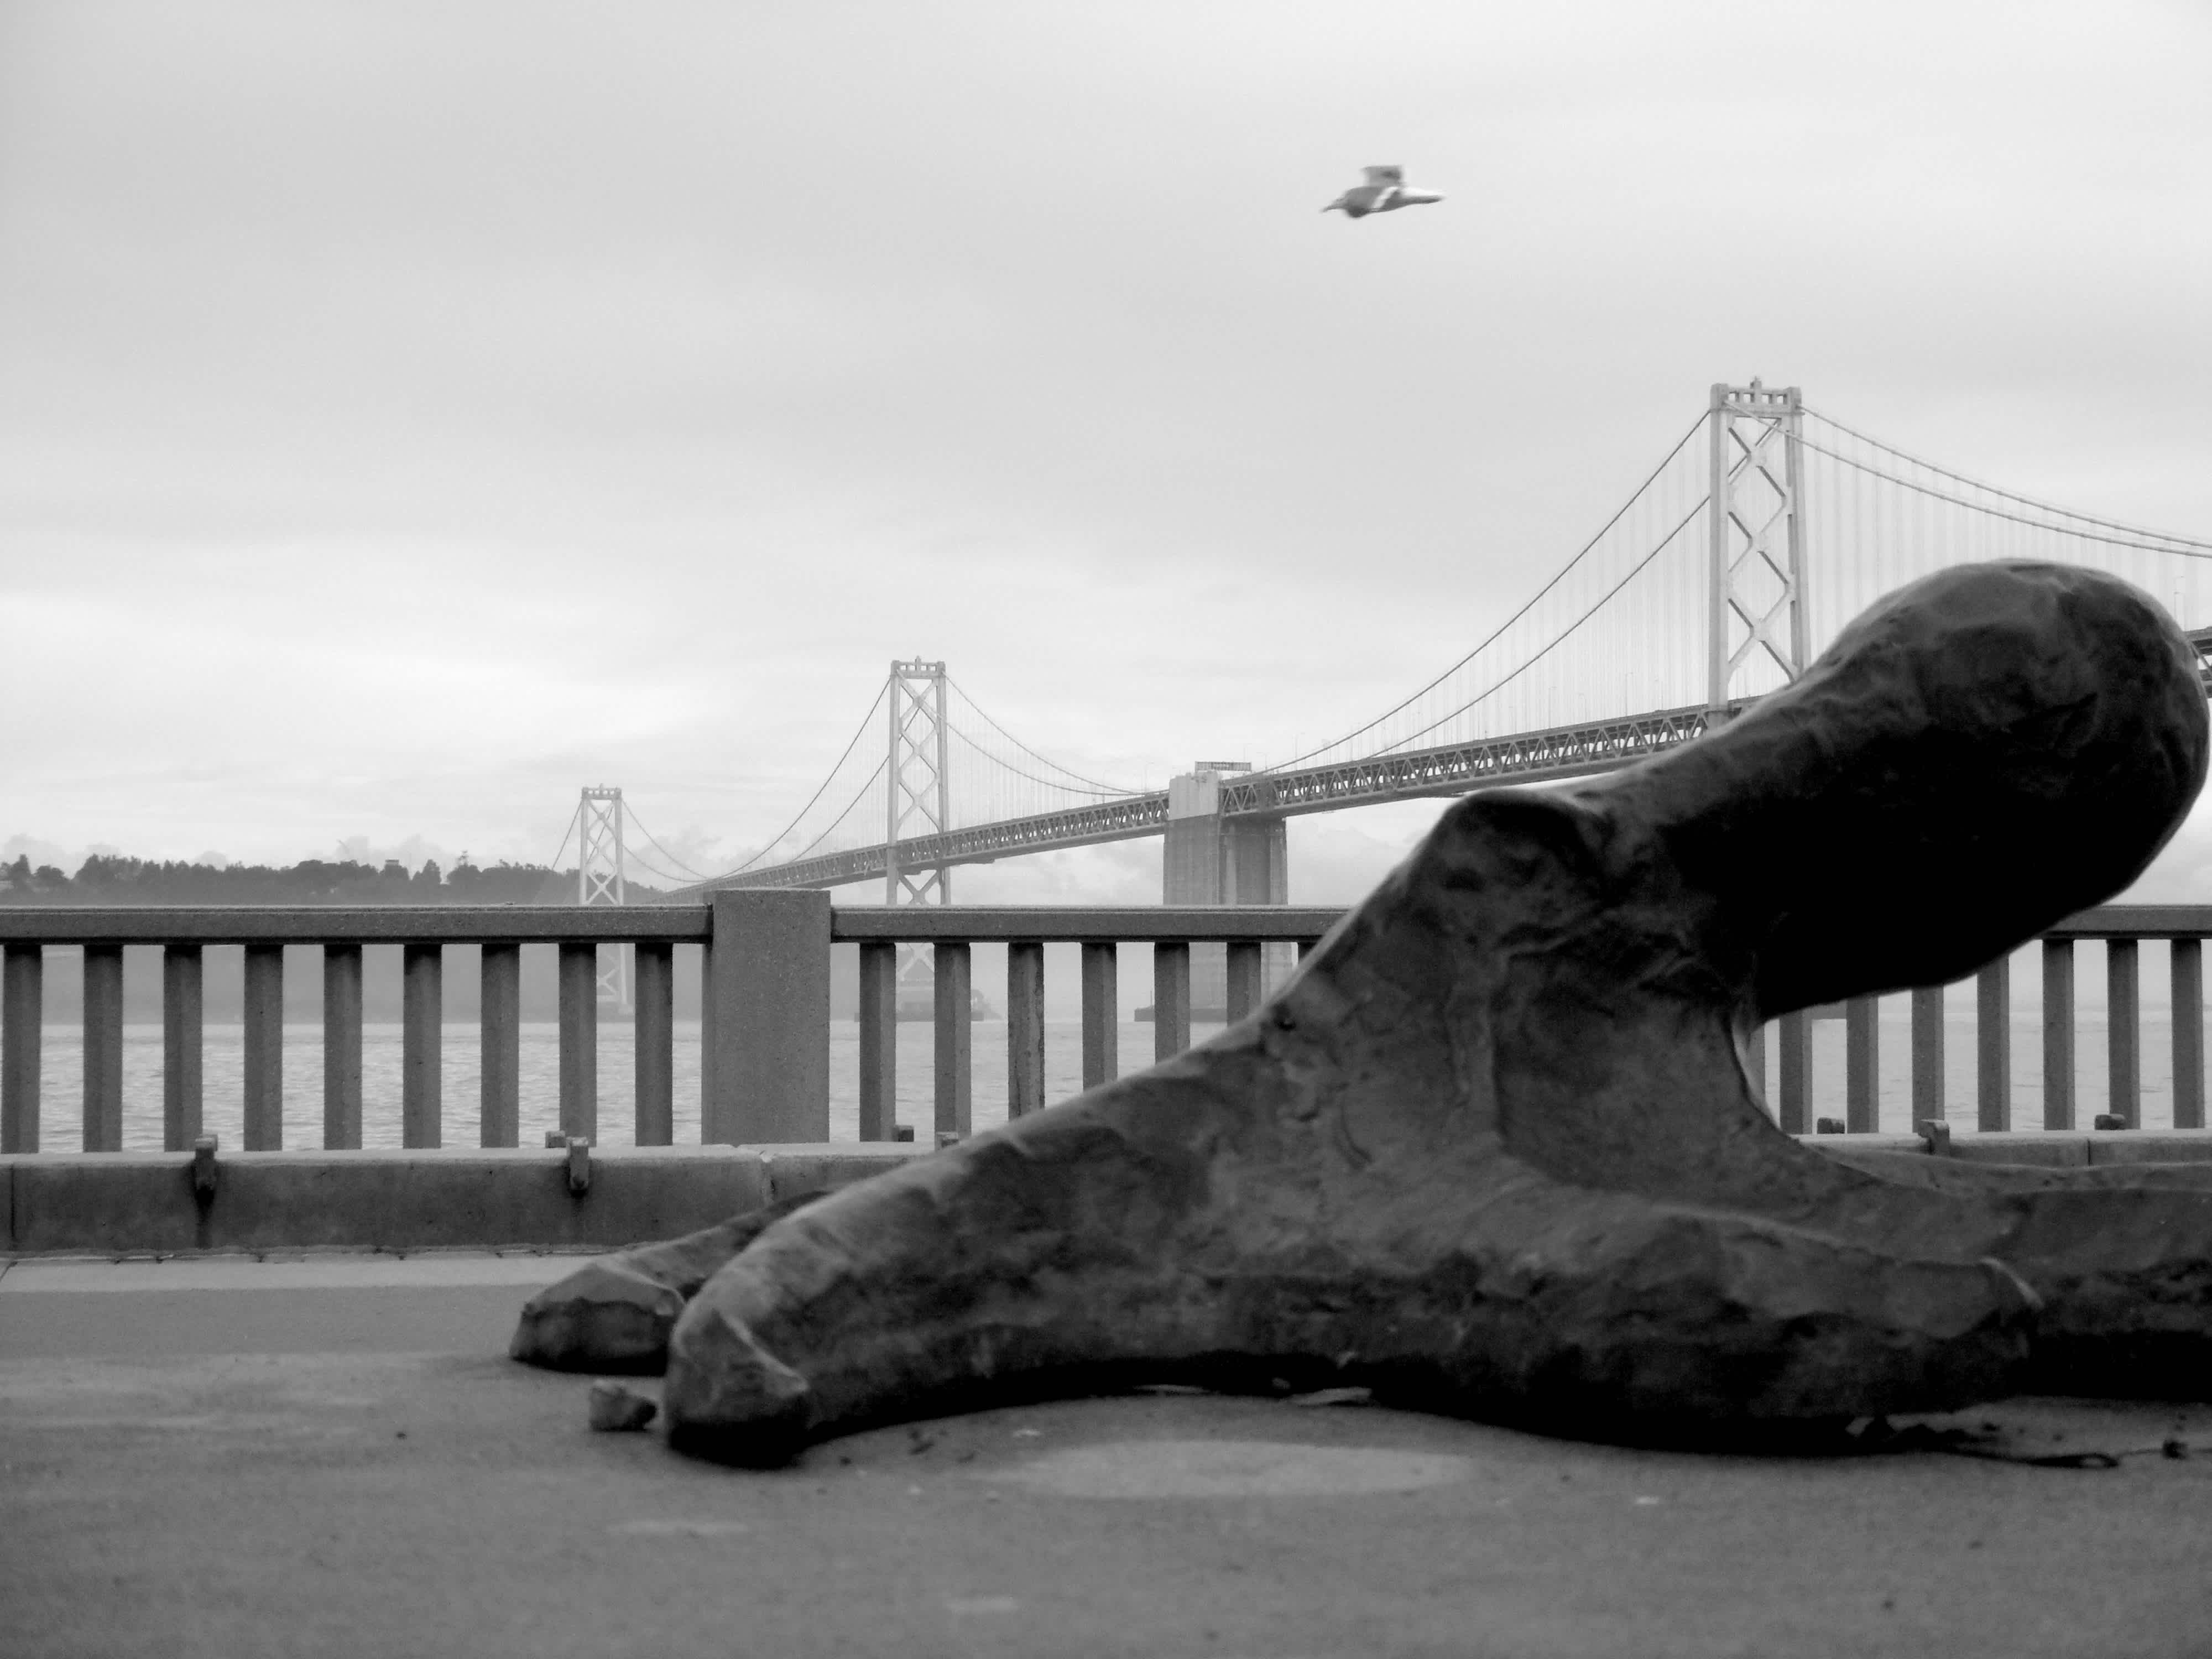 Statue in front of a railing with a bridge in the background in black and white in Ferry Building, San Francisco, California. 